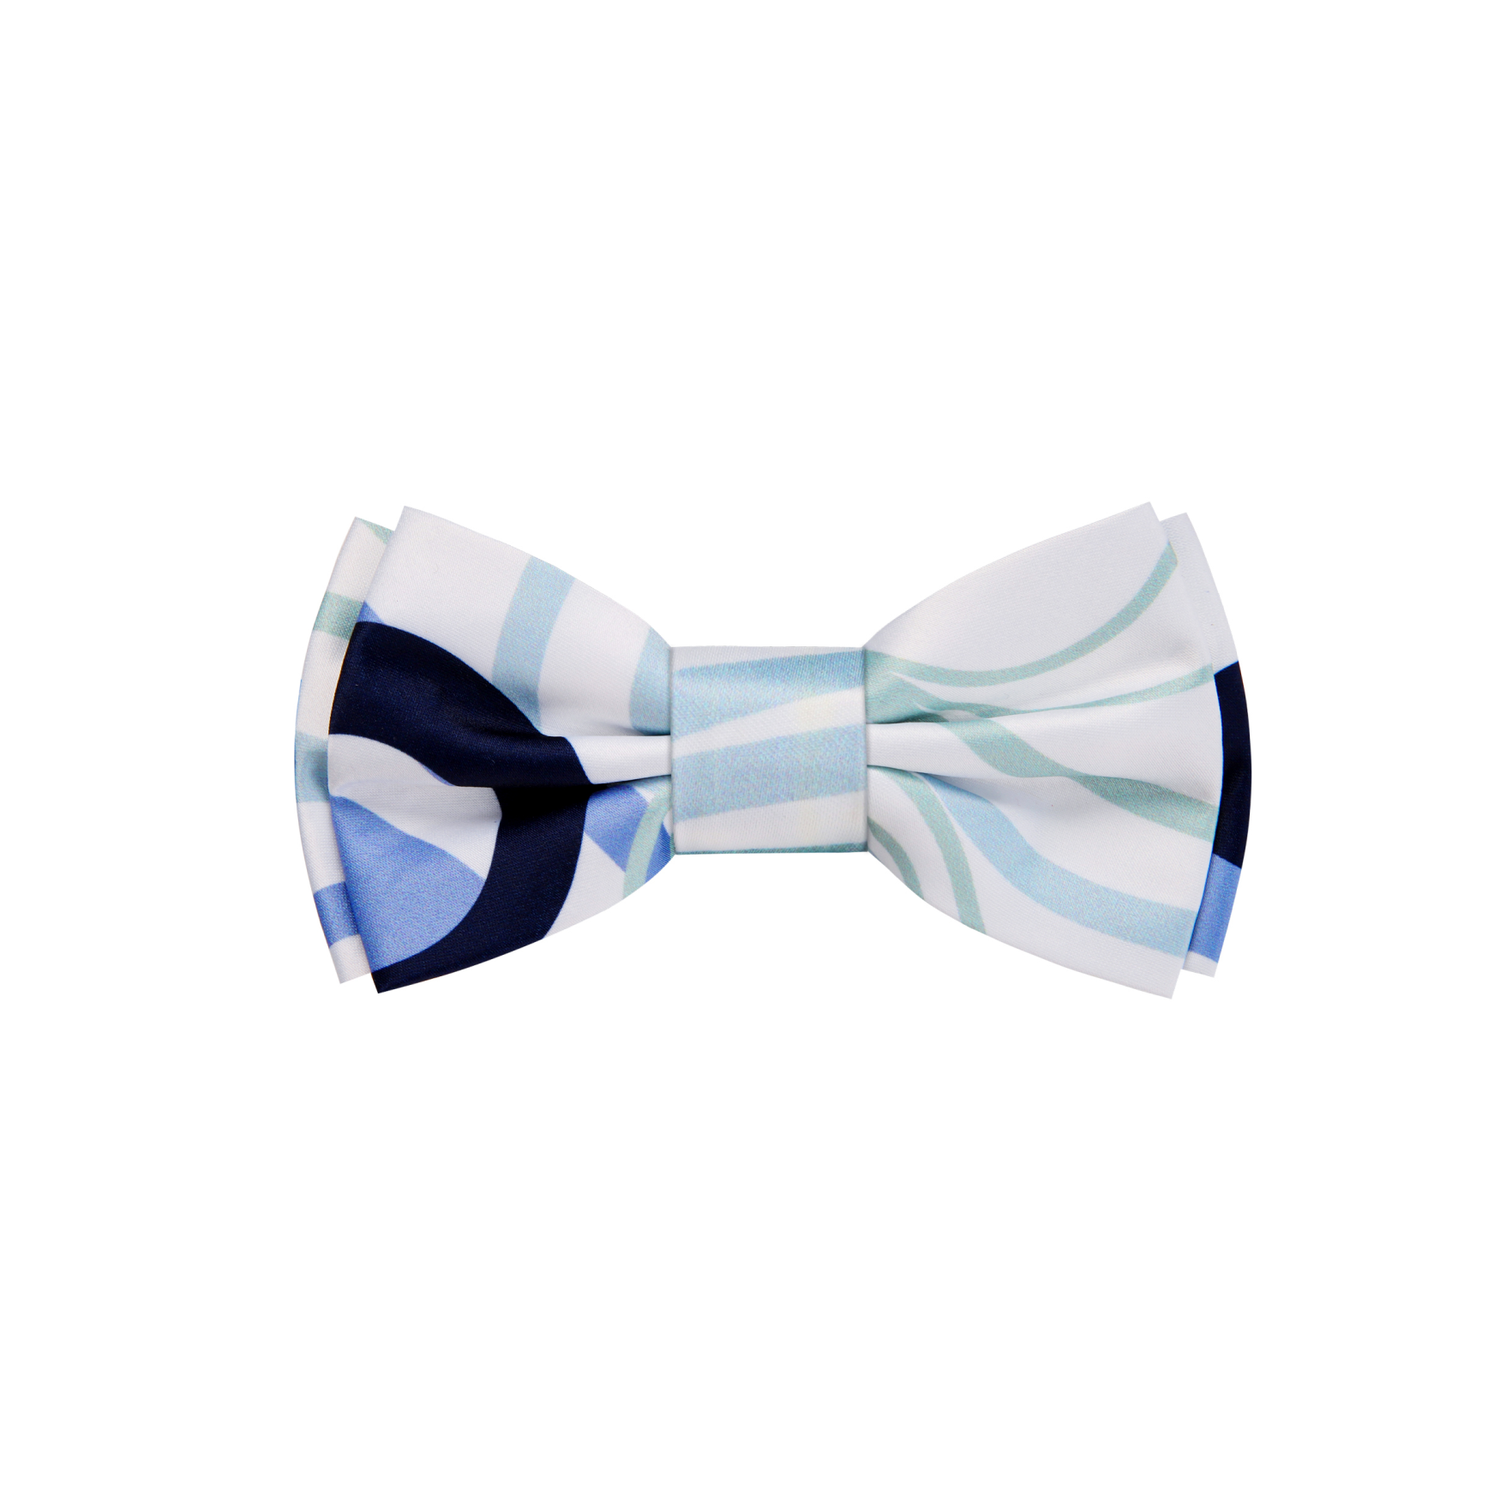 A Light Bone, Black, Pale Cactus, Steel Blue Color Abstract Circle Pattern Bow Tie